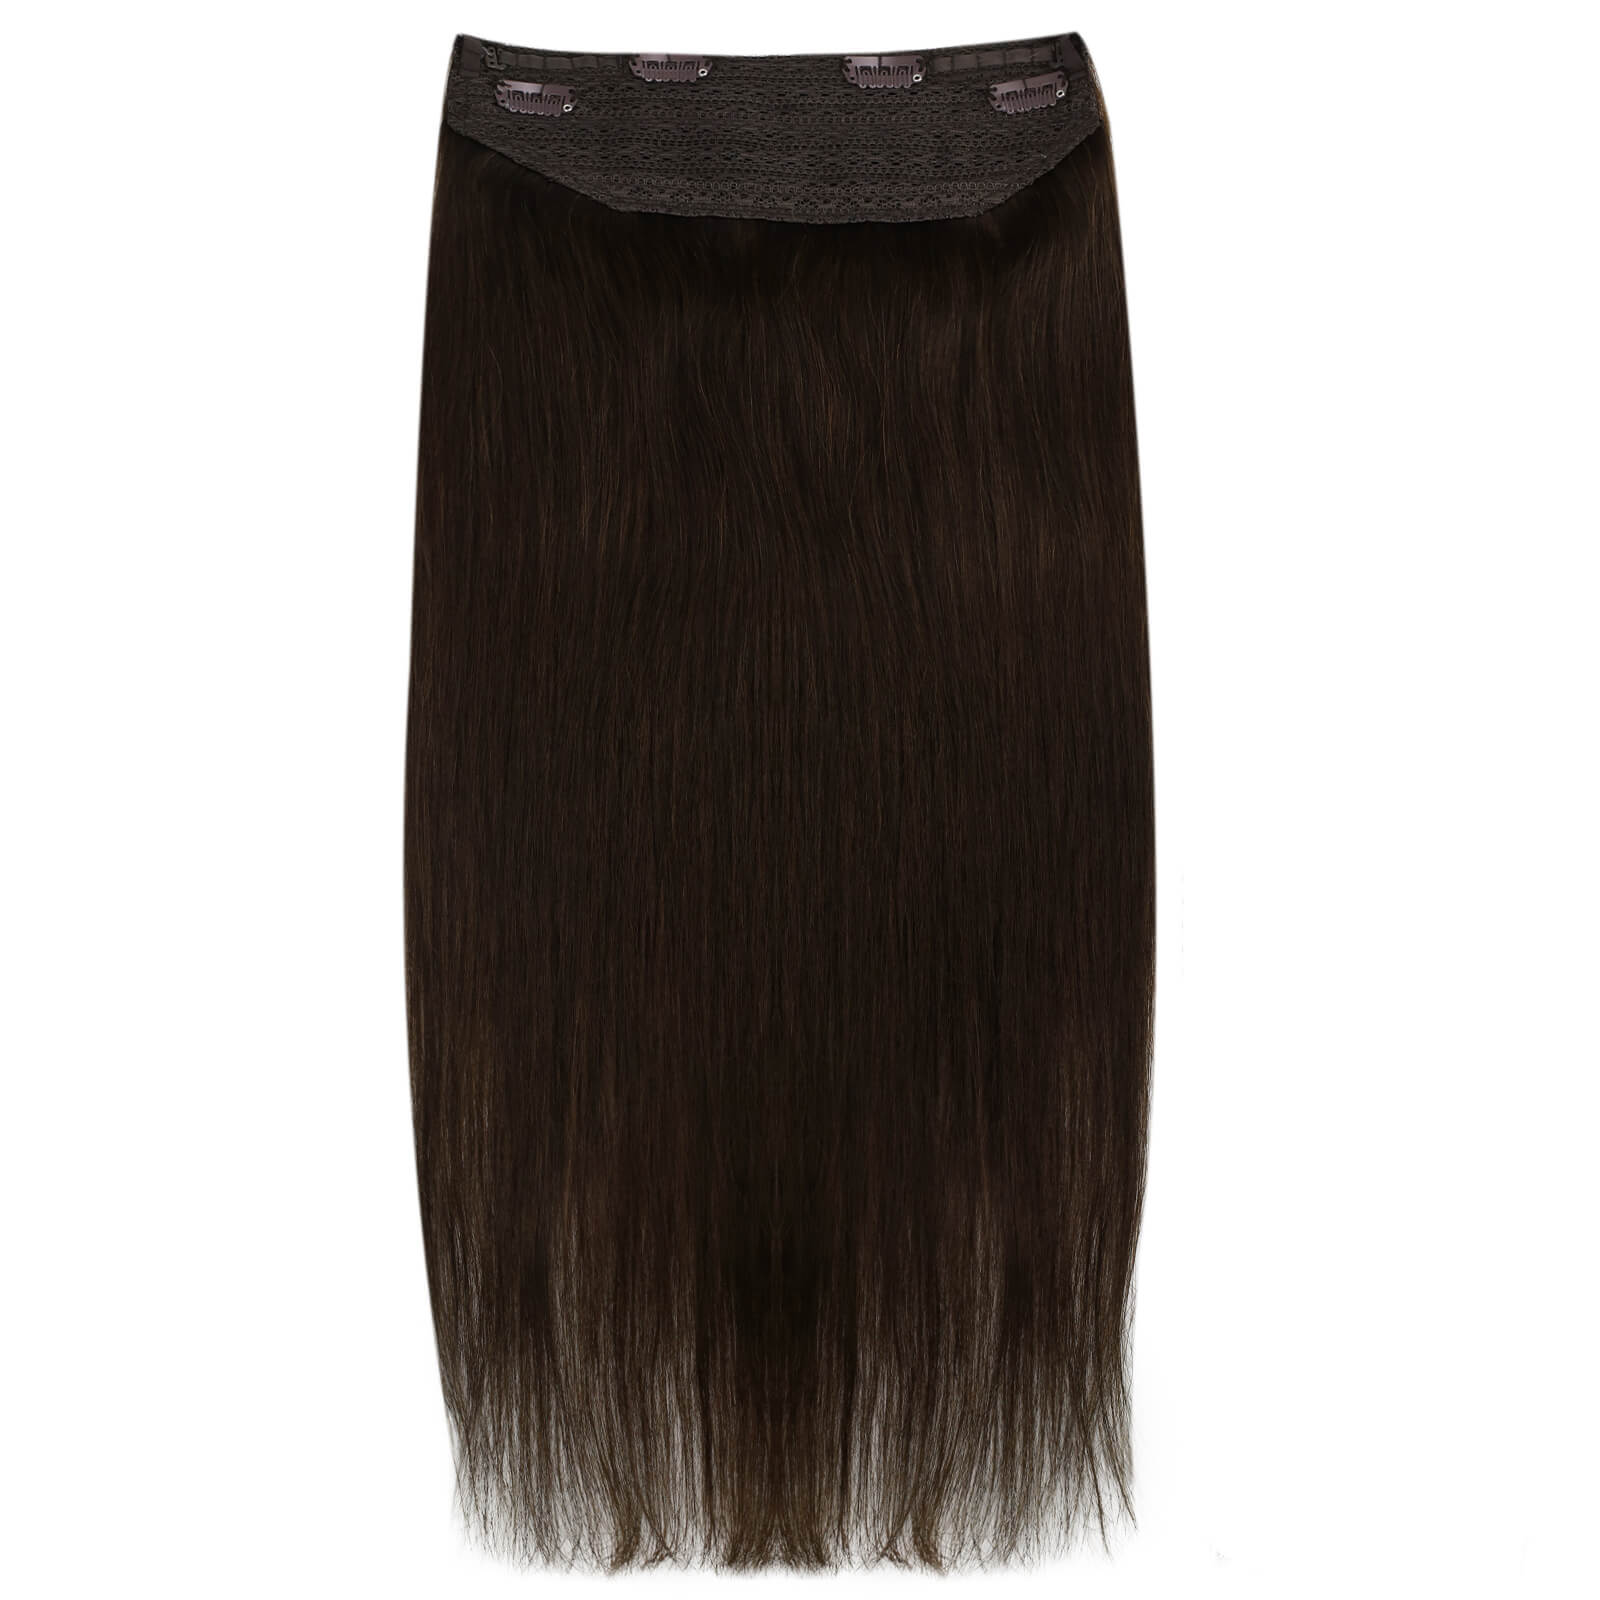 20InchDarkBrownWireHairExtensions